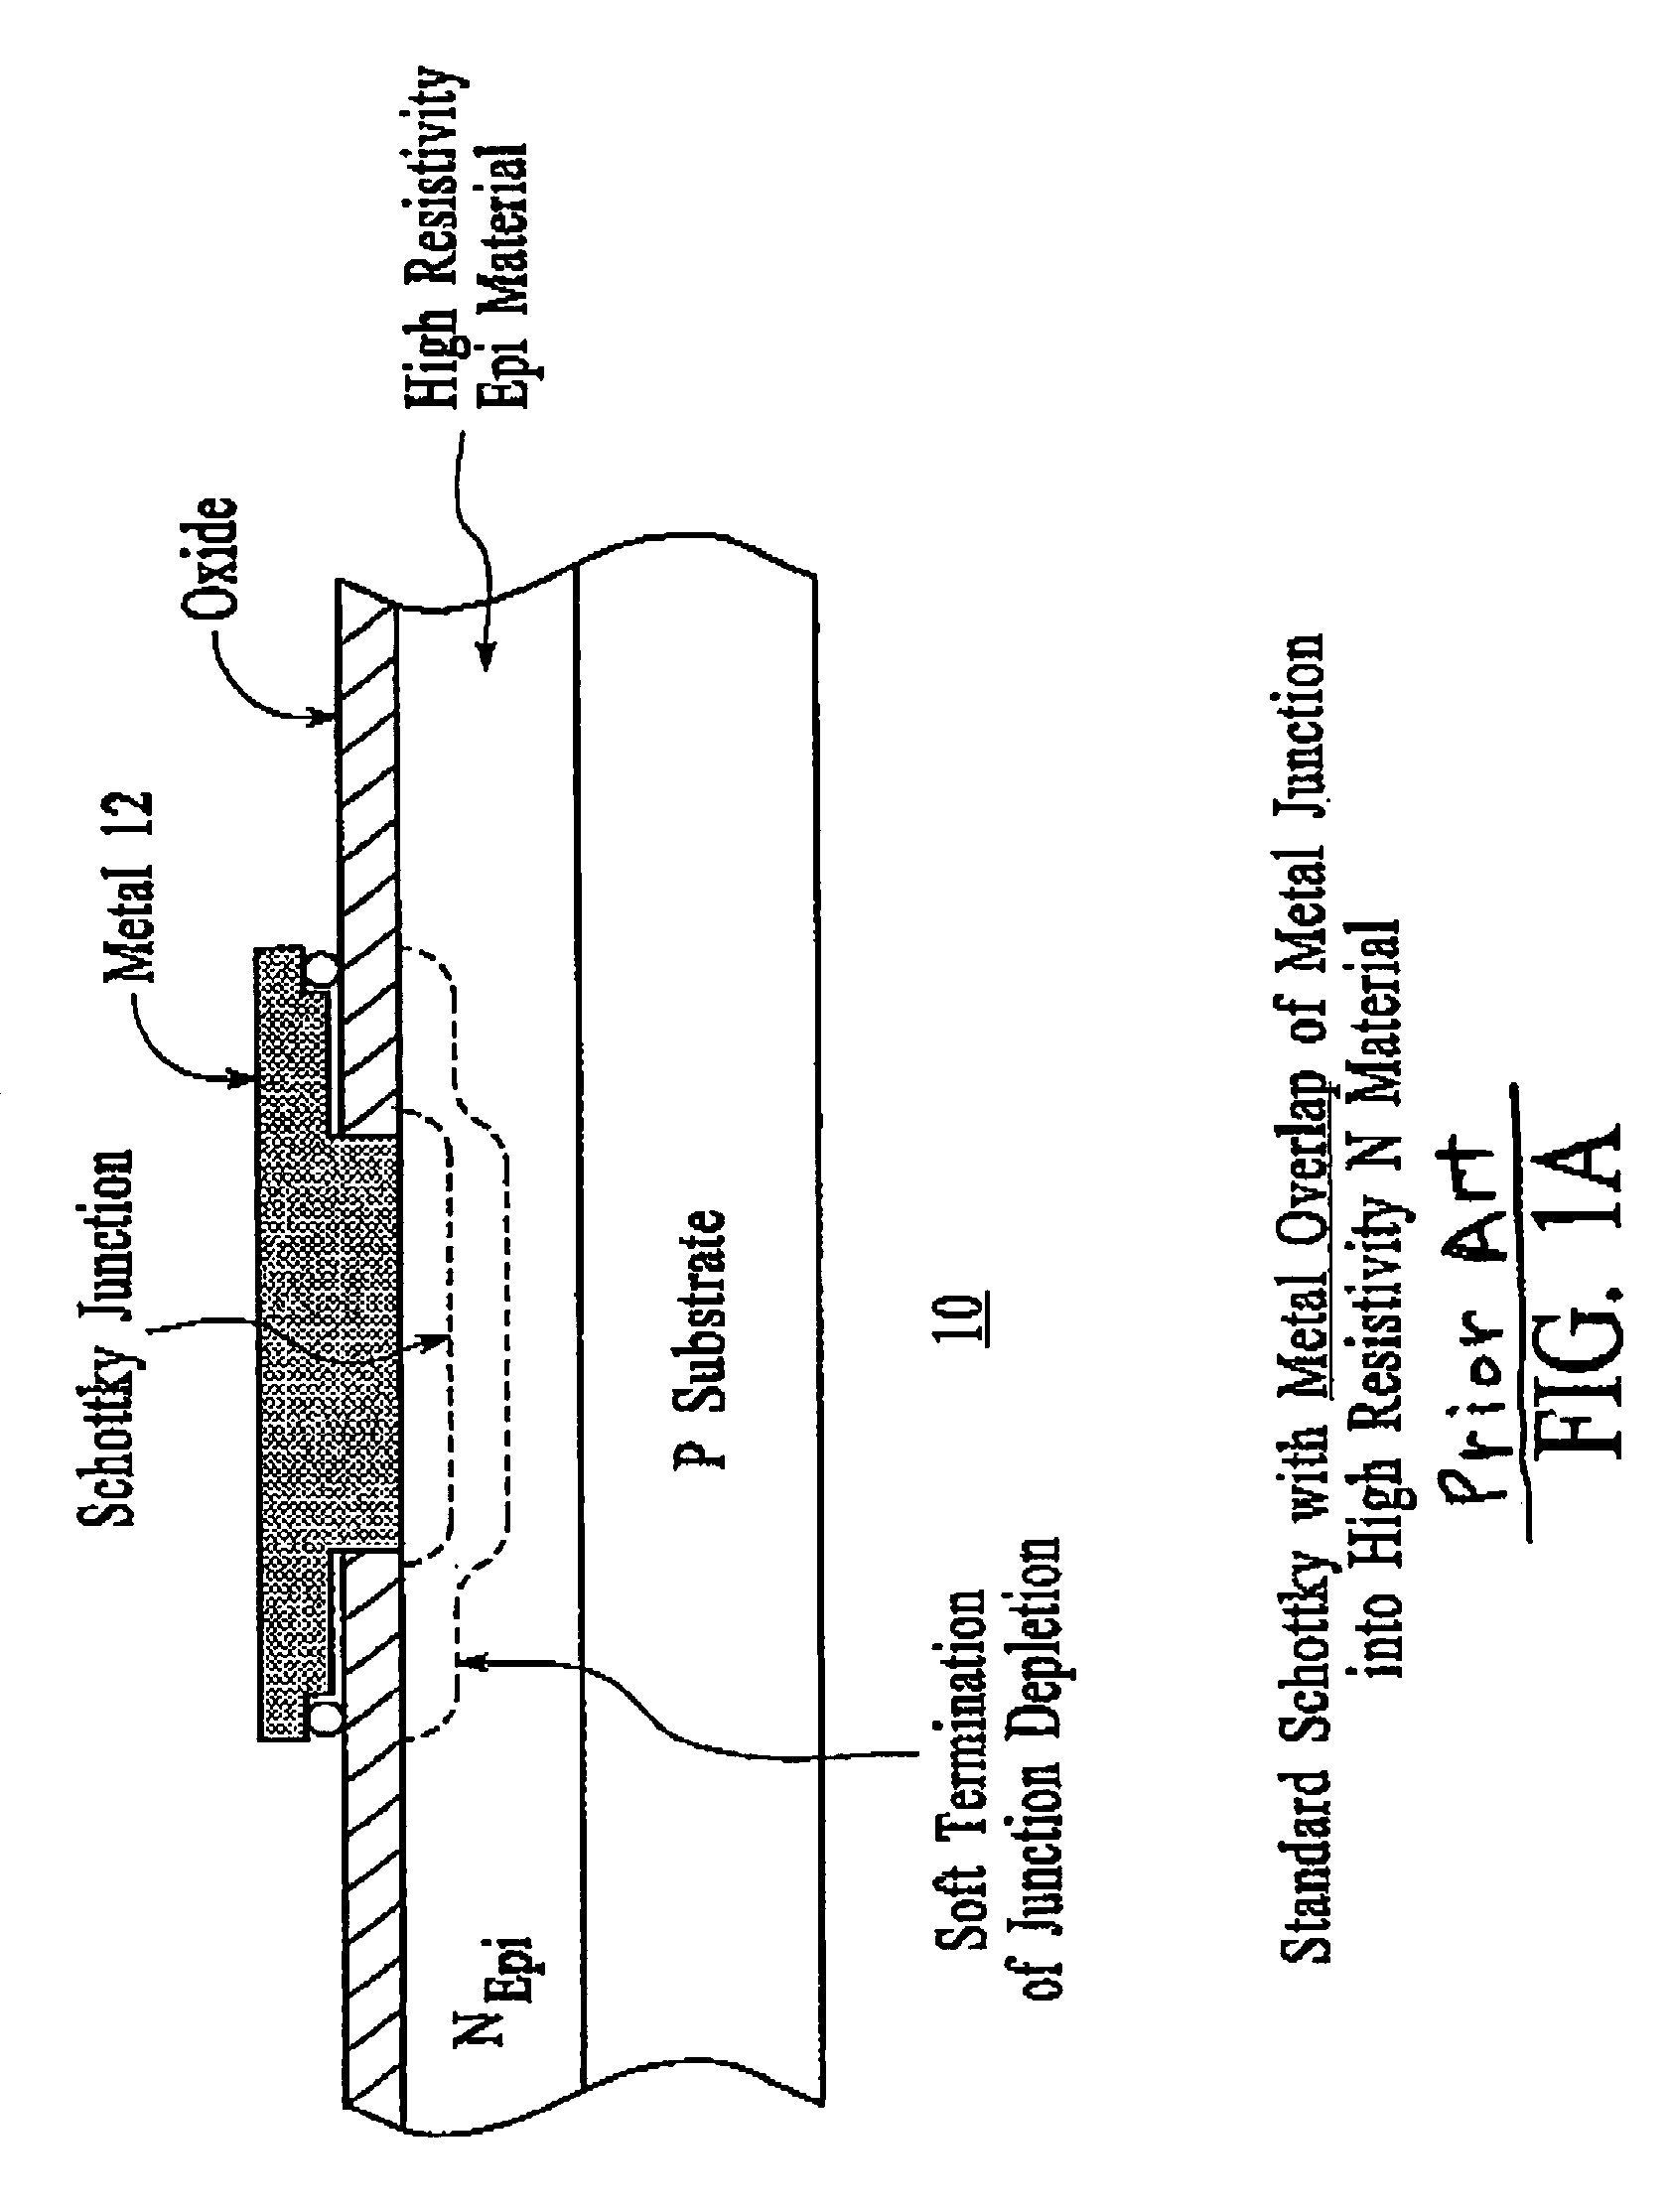 Integrated schottky diode using buried power buss structure and method for making same